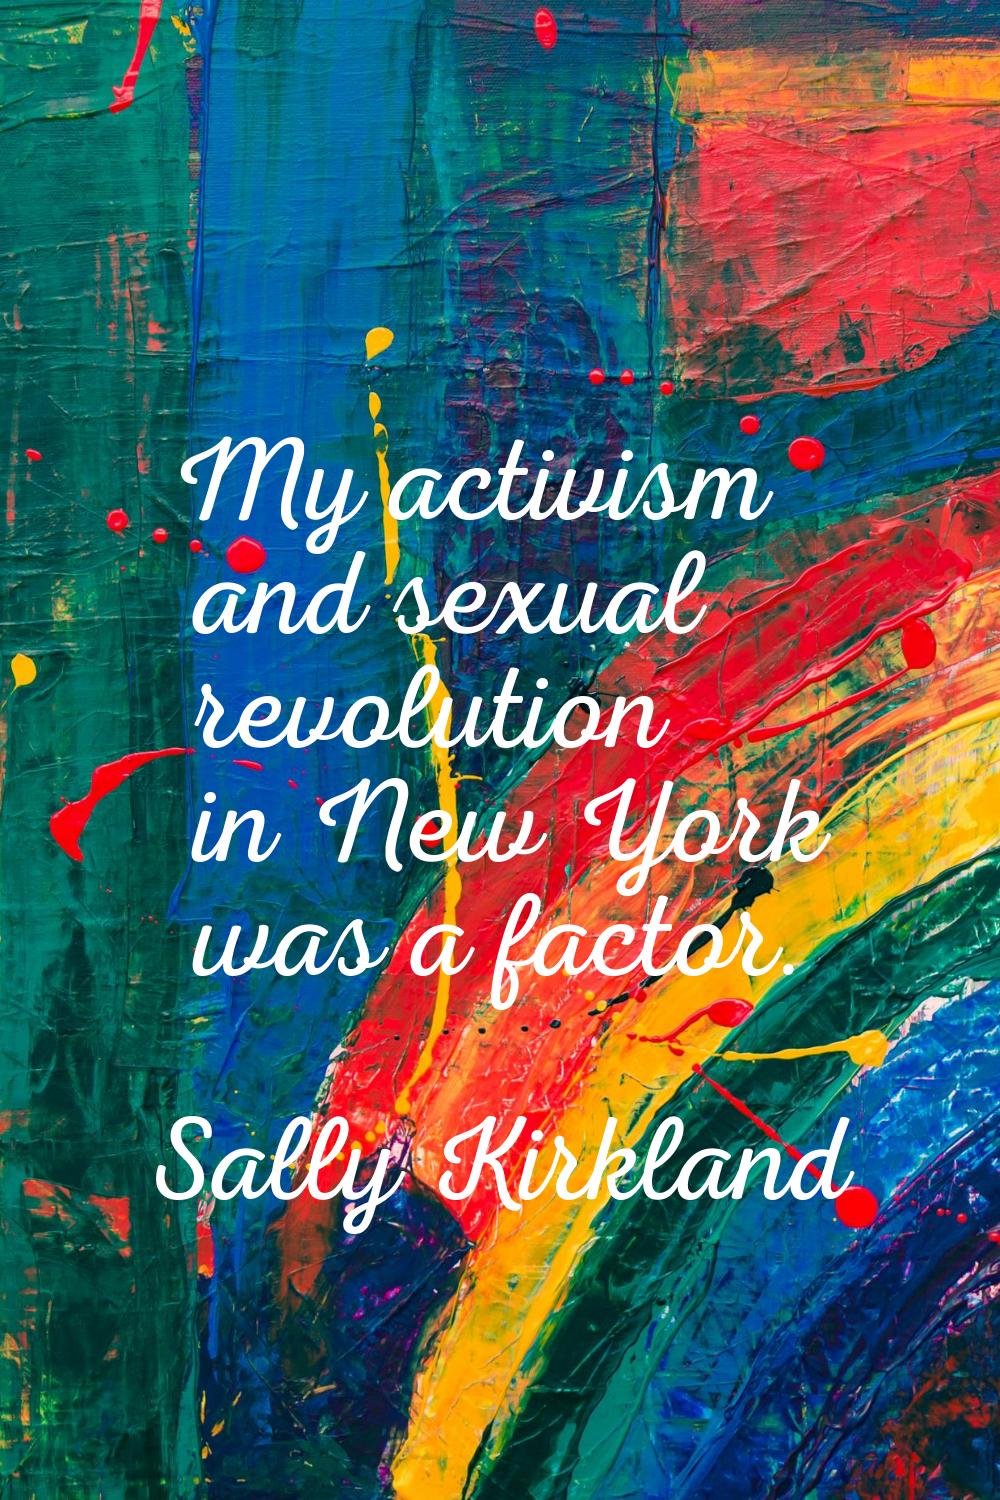 My activism and sexual revolution in New York was a factor.